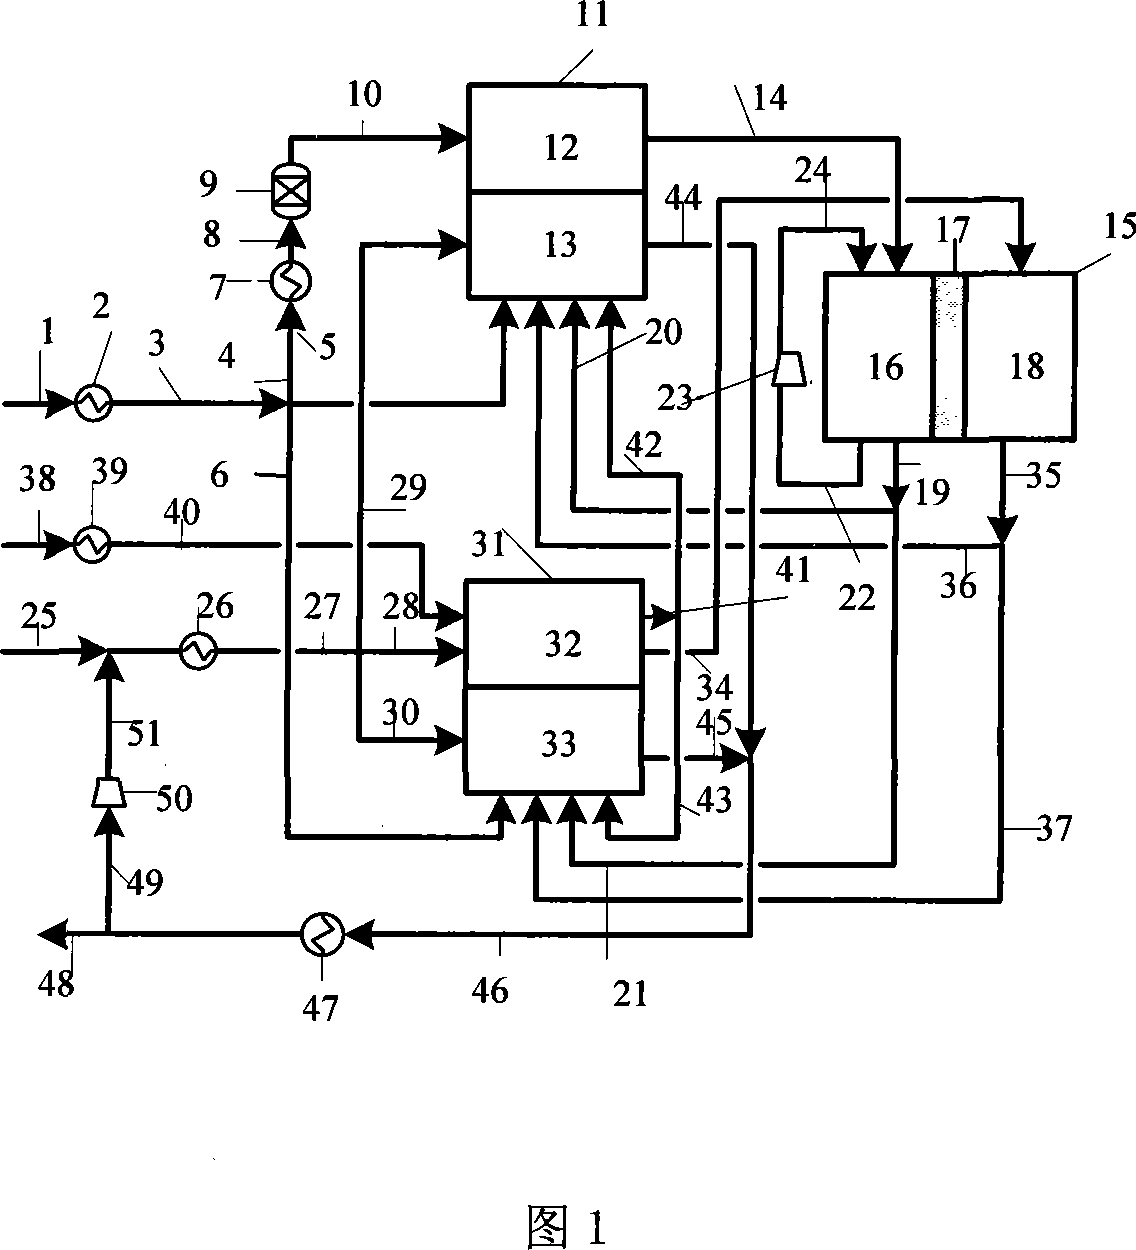 Natural gas melting carbonate fuel cell generation system